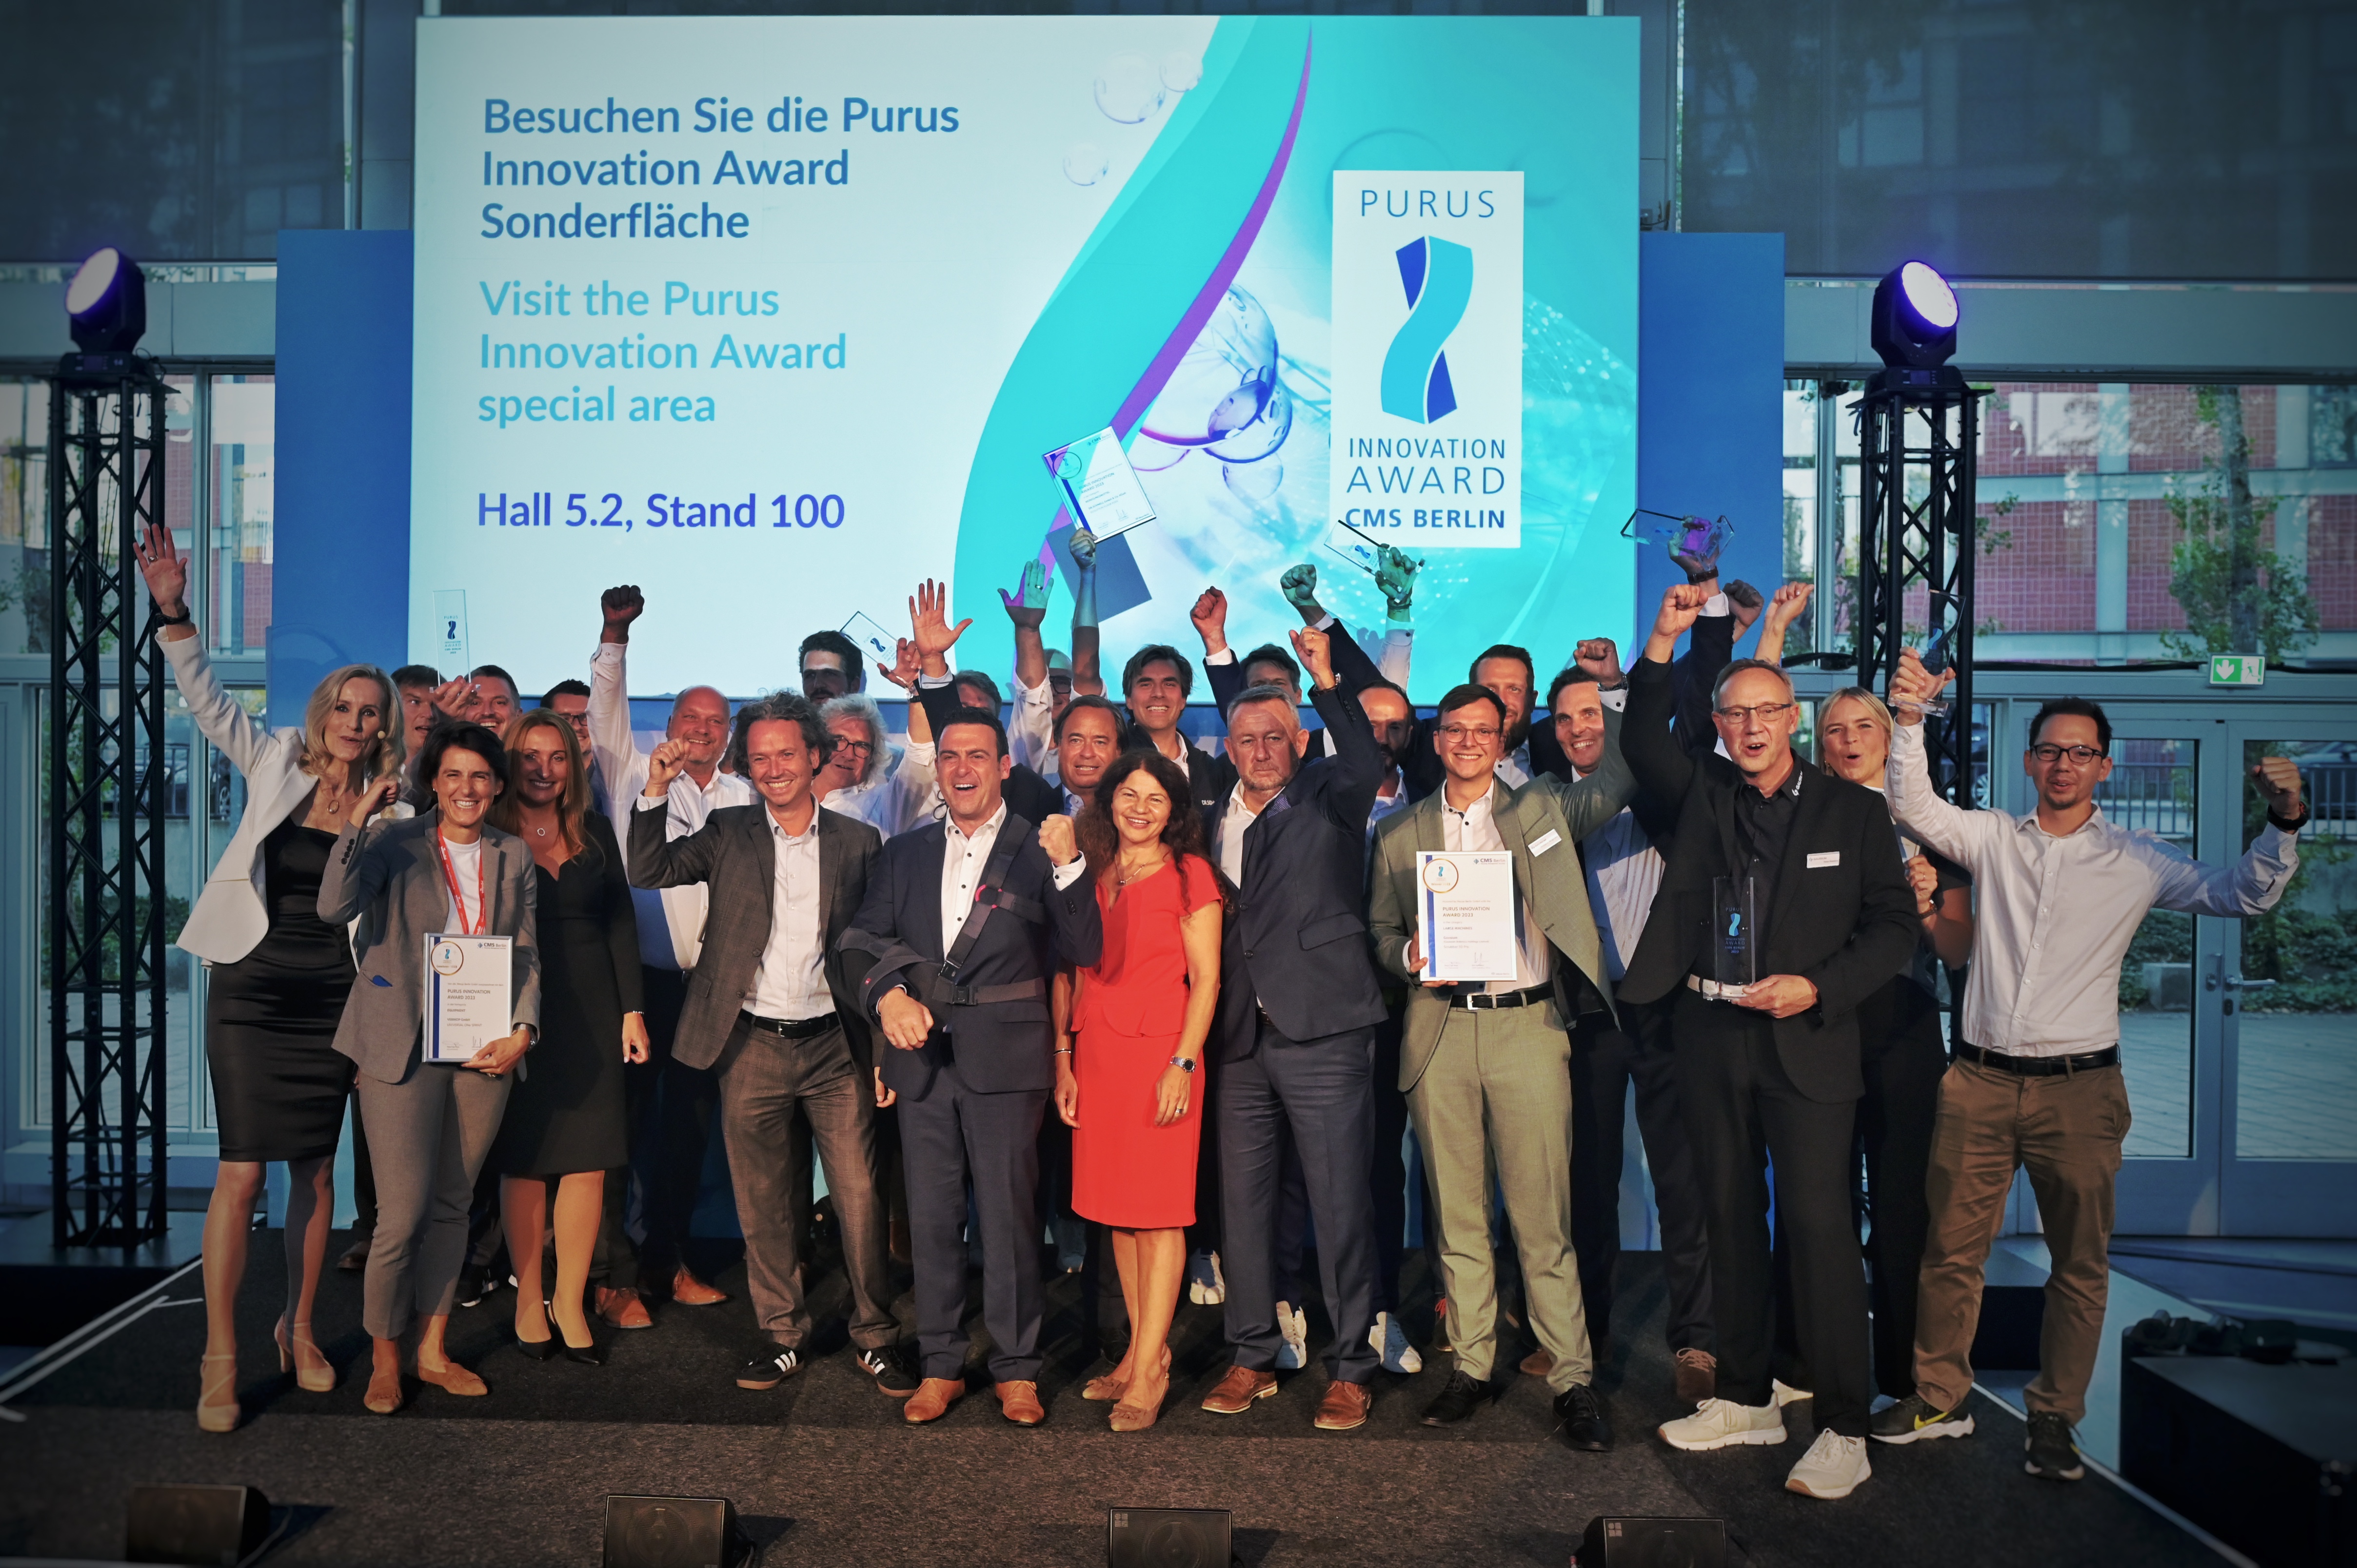 At the end of the Purus Award ceremony, the jury gathered on stage with all six winners.